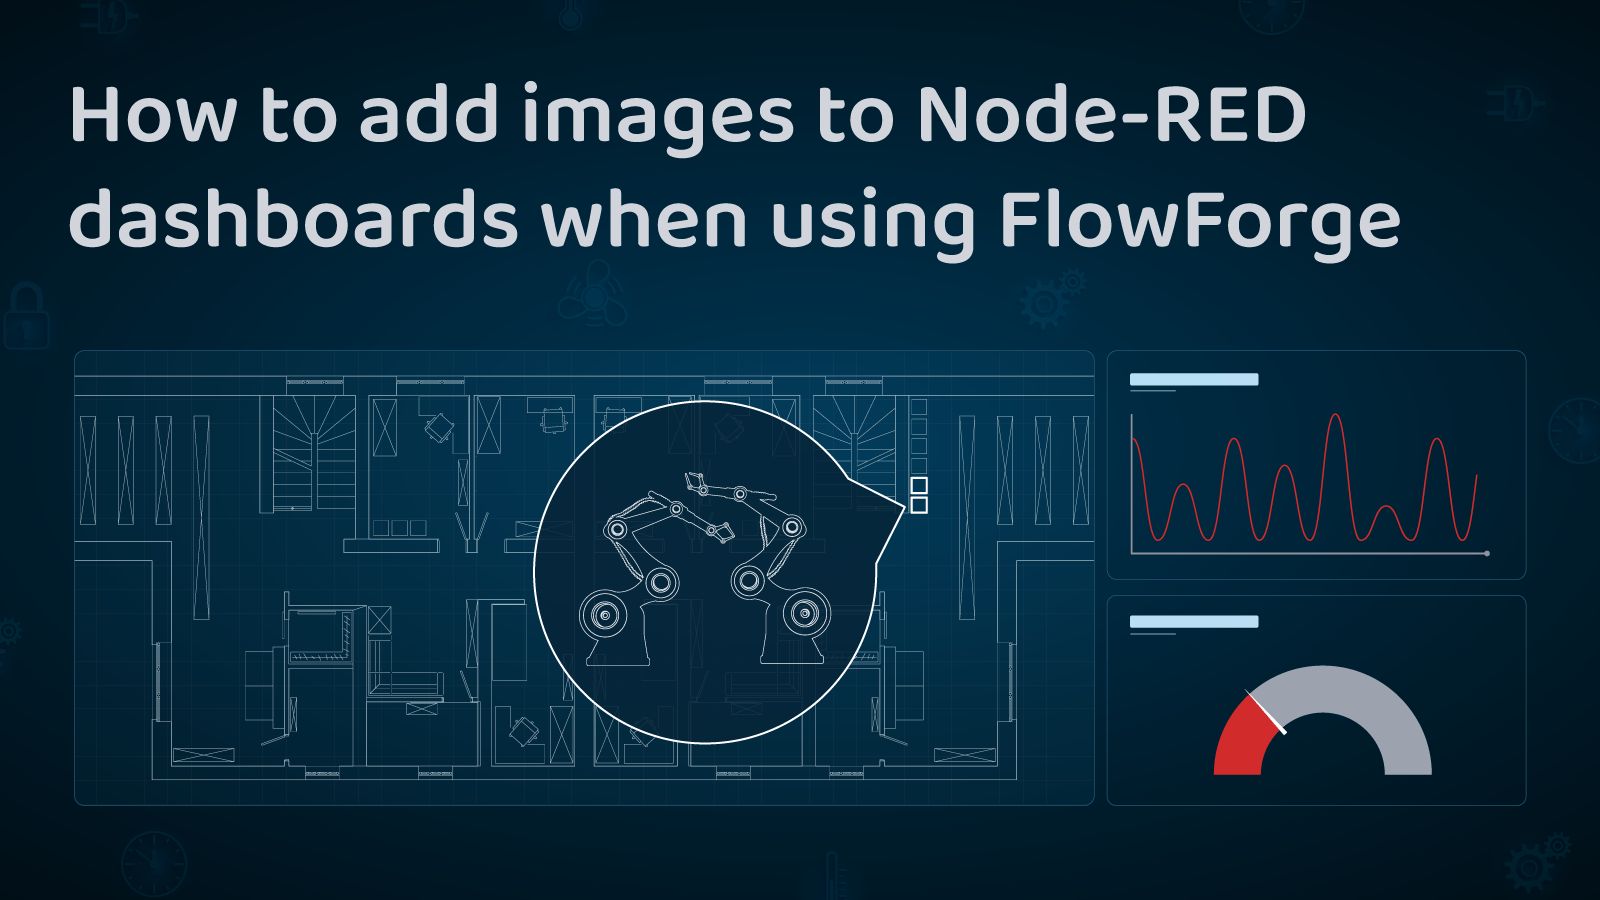 Image representing How to add images to Node-RED dashboards when using FlowFuse